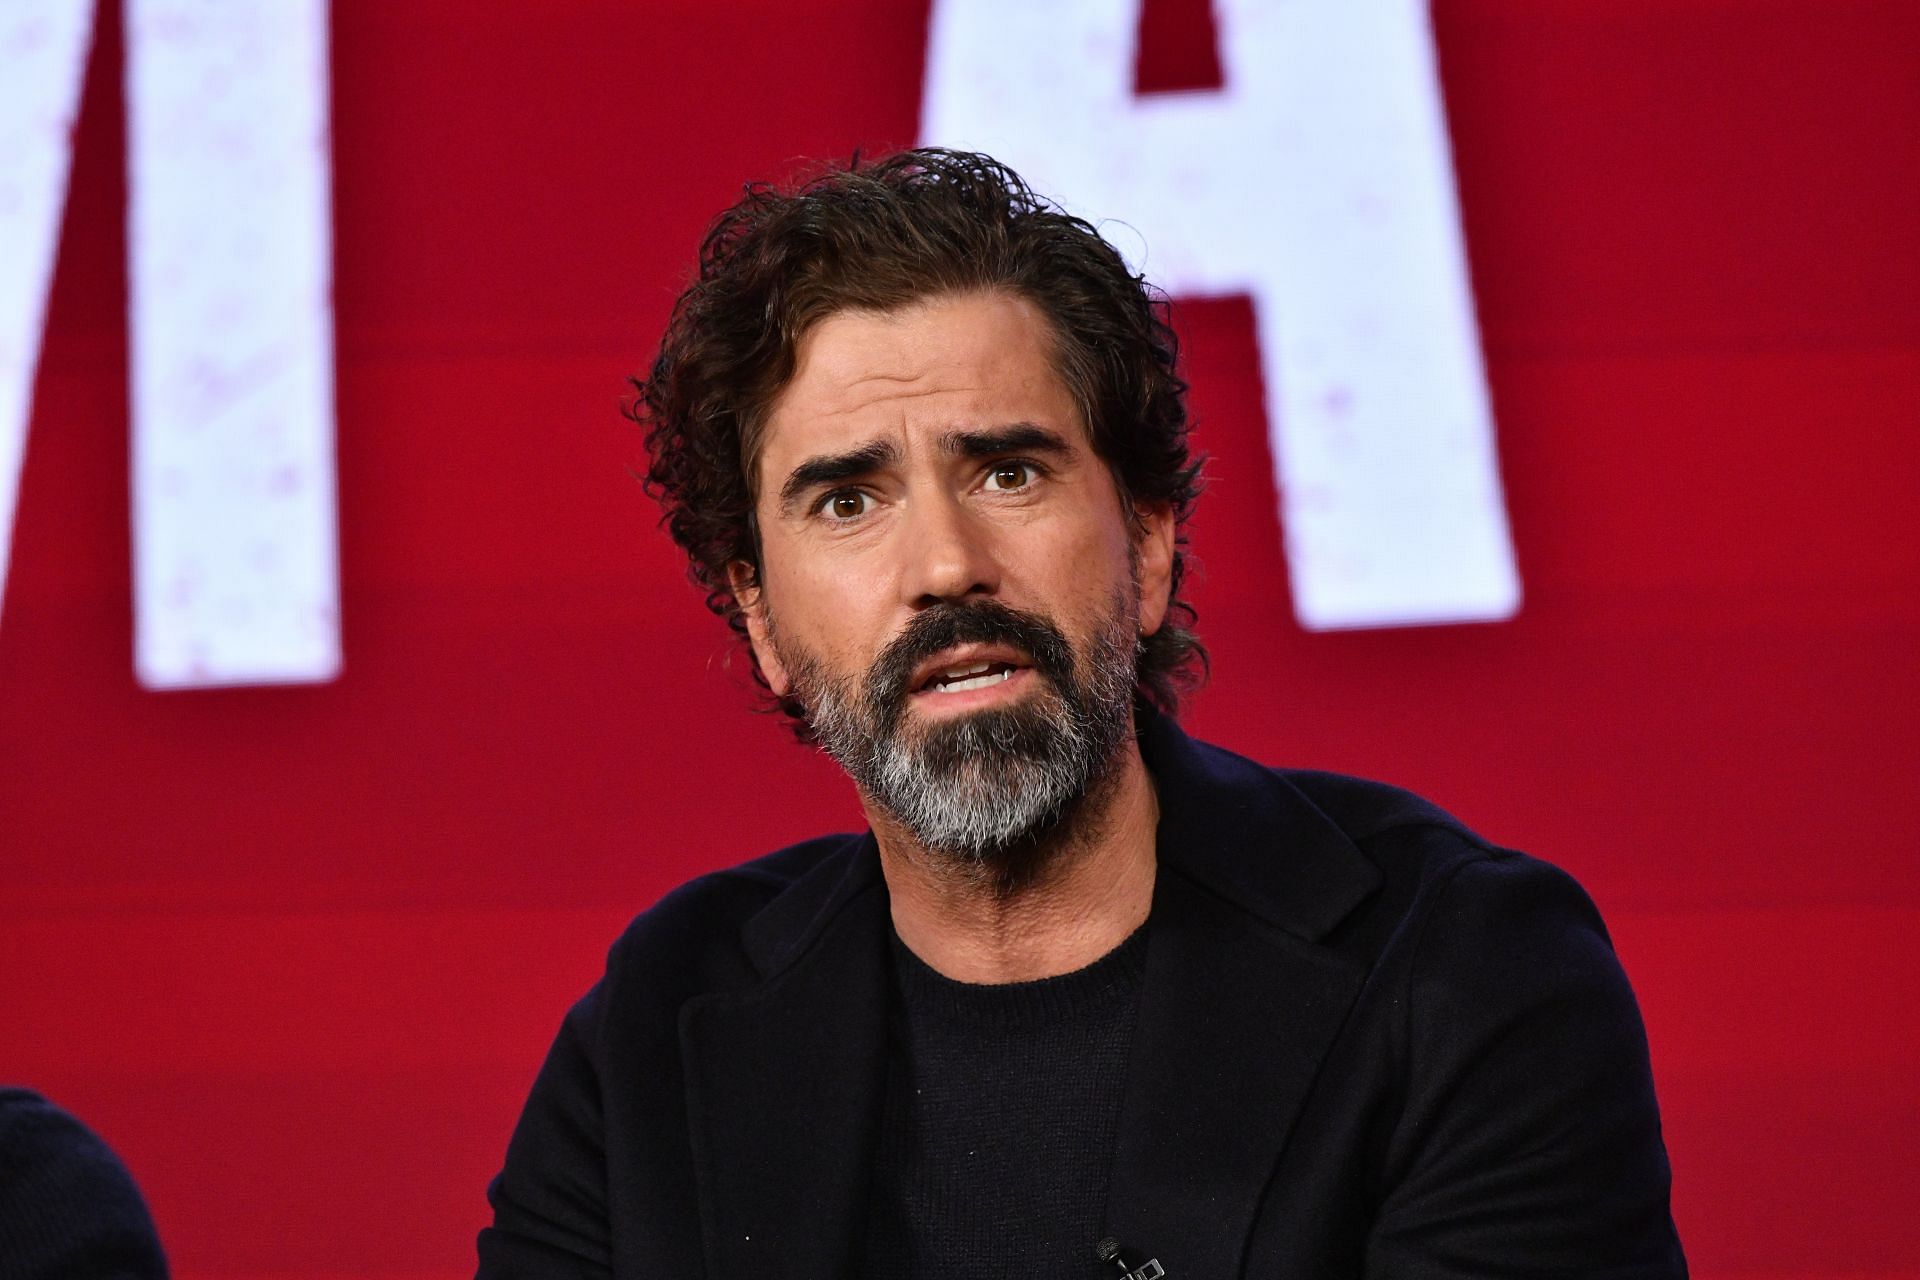 Hamish Linklater will voice Batman in Caped Crusader (image via Getty)